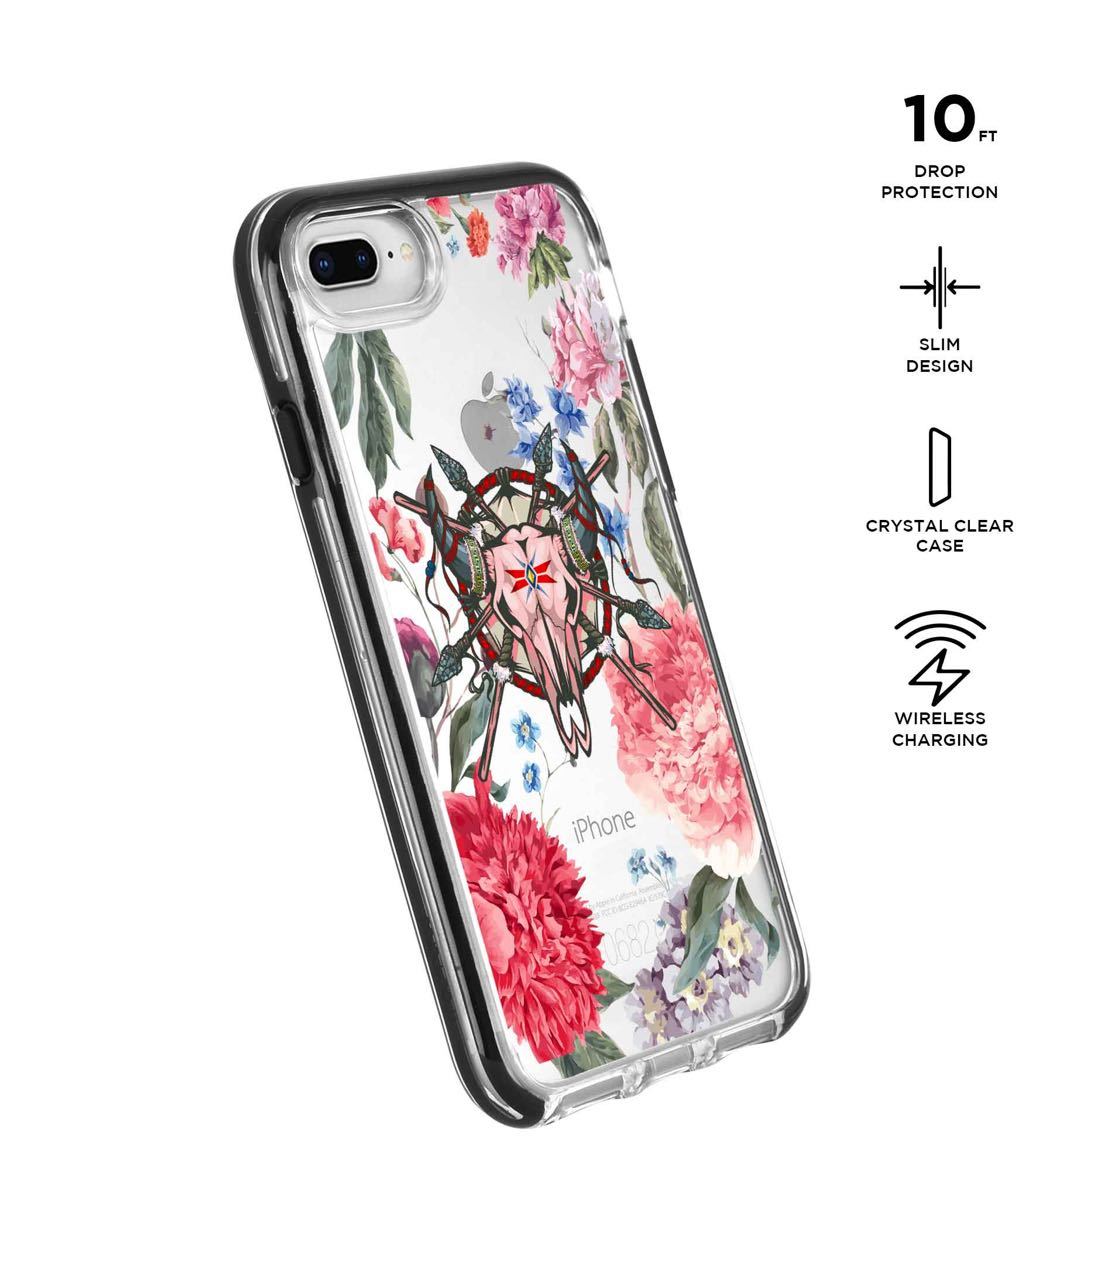 Floral Symmetry - Extreme Phone Case for iPhone 8 Plus